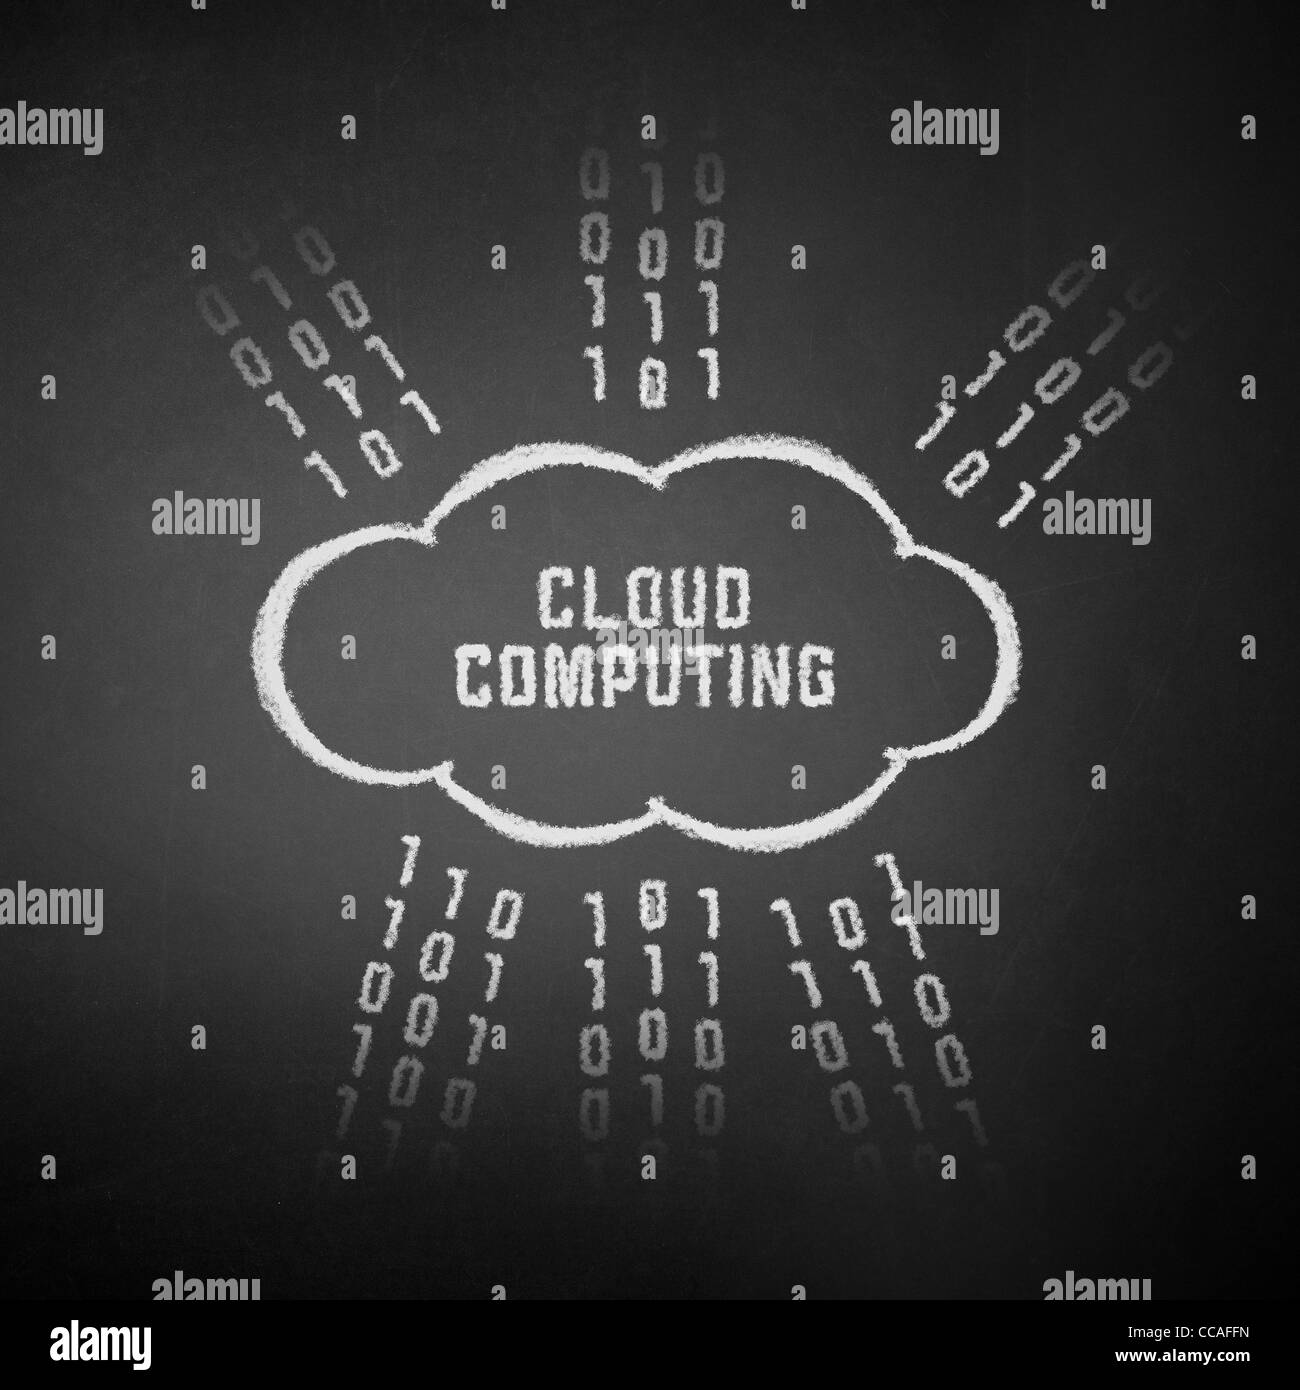 Conceptual picture on cloud computing theme. Drawing on textured background. Stock Photo